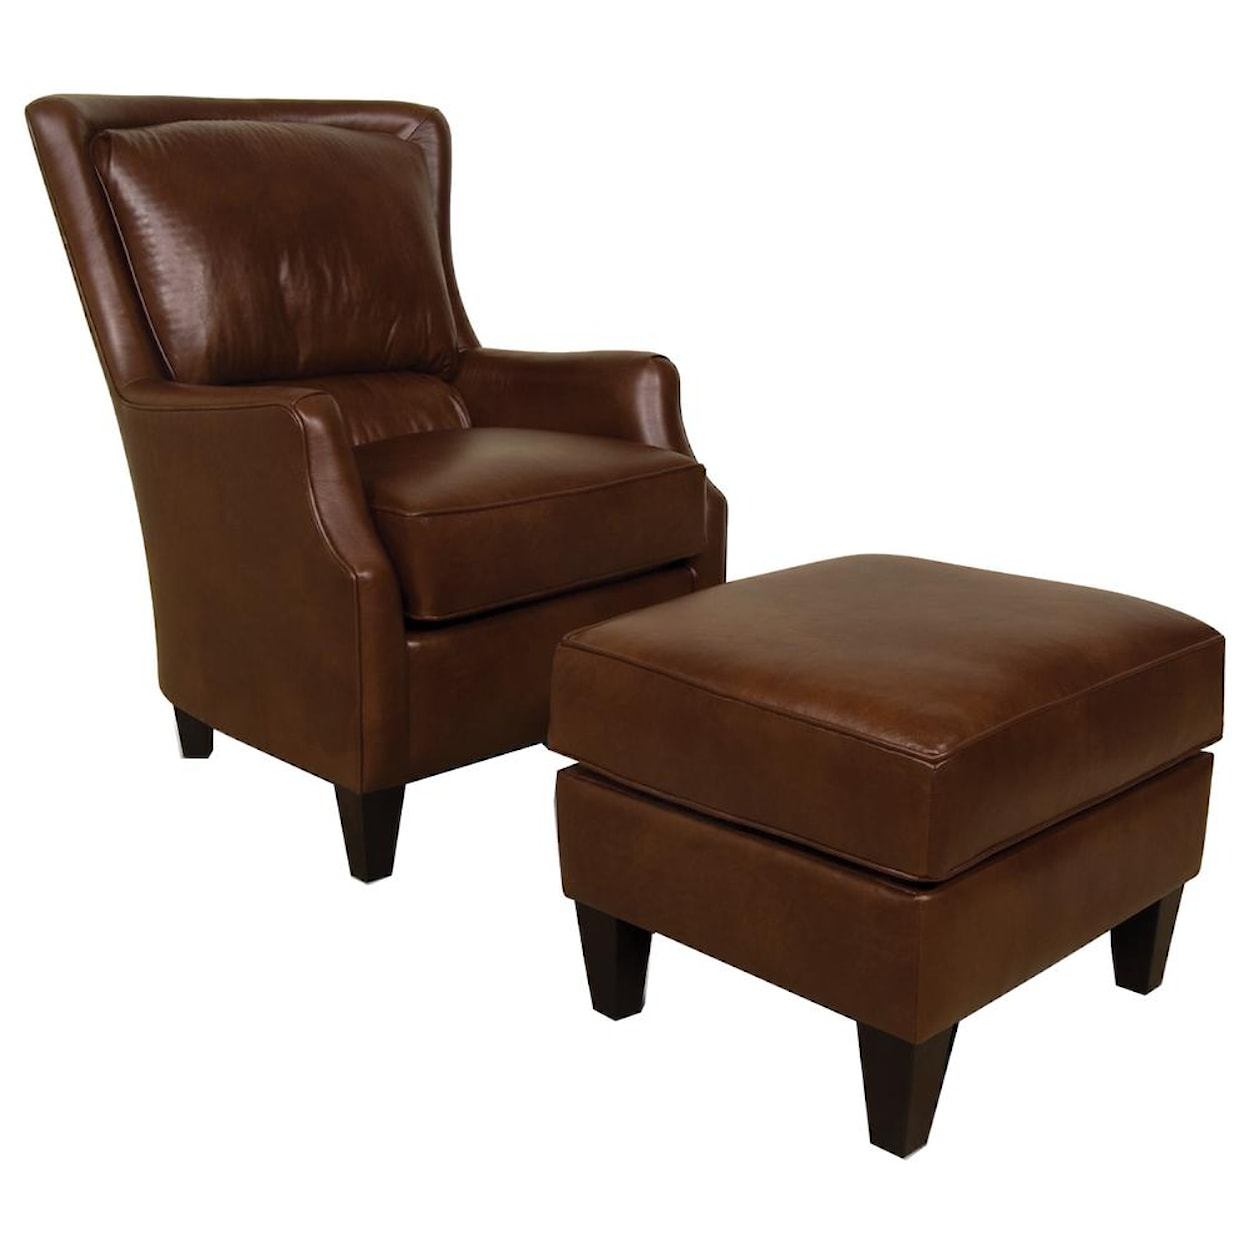 Tennessee Custom Upholstery 2910/AL Series Upholstered Club Chair and Ottoman